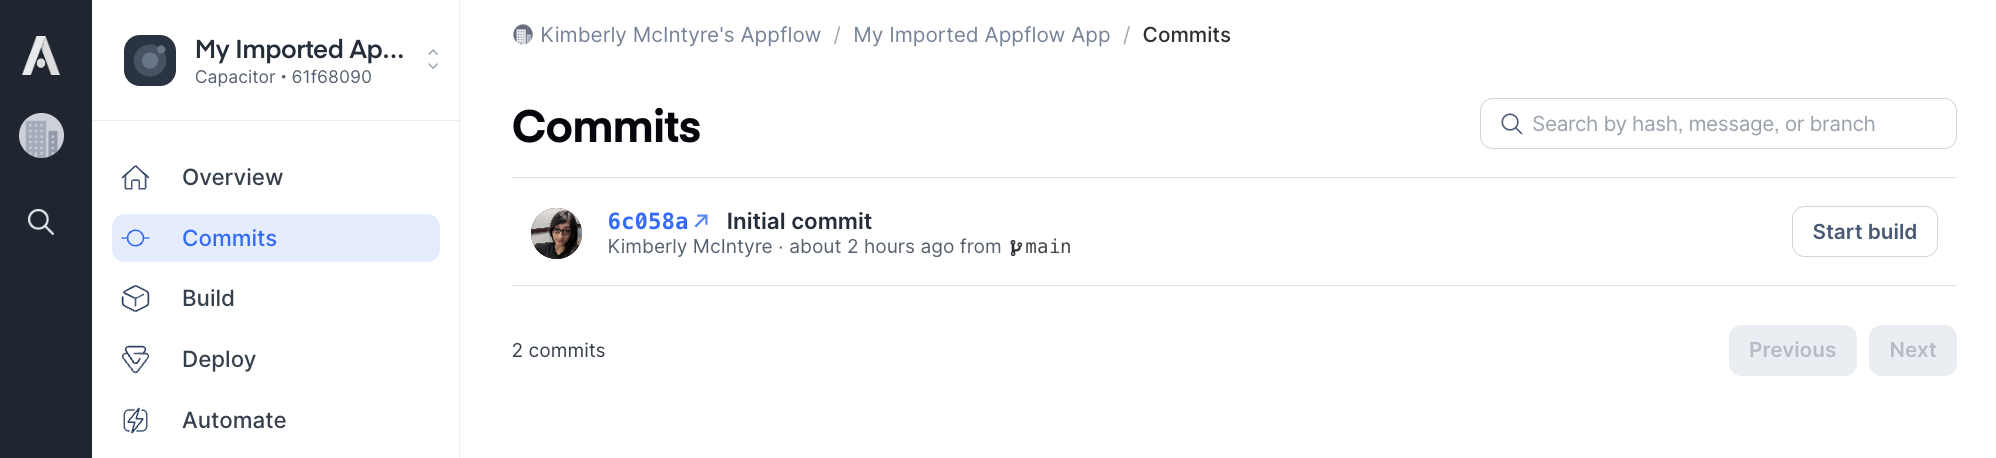 commits-list-after-import